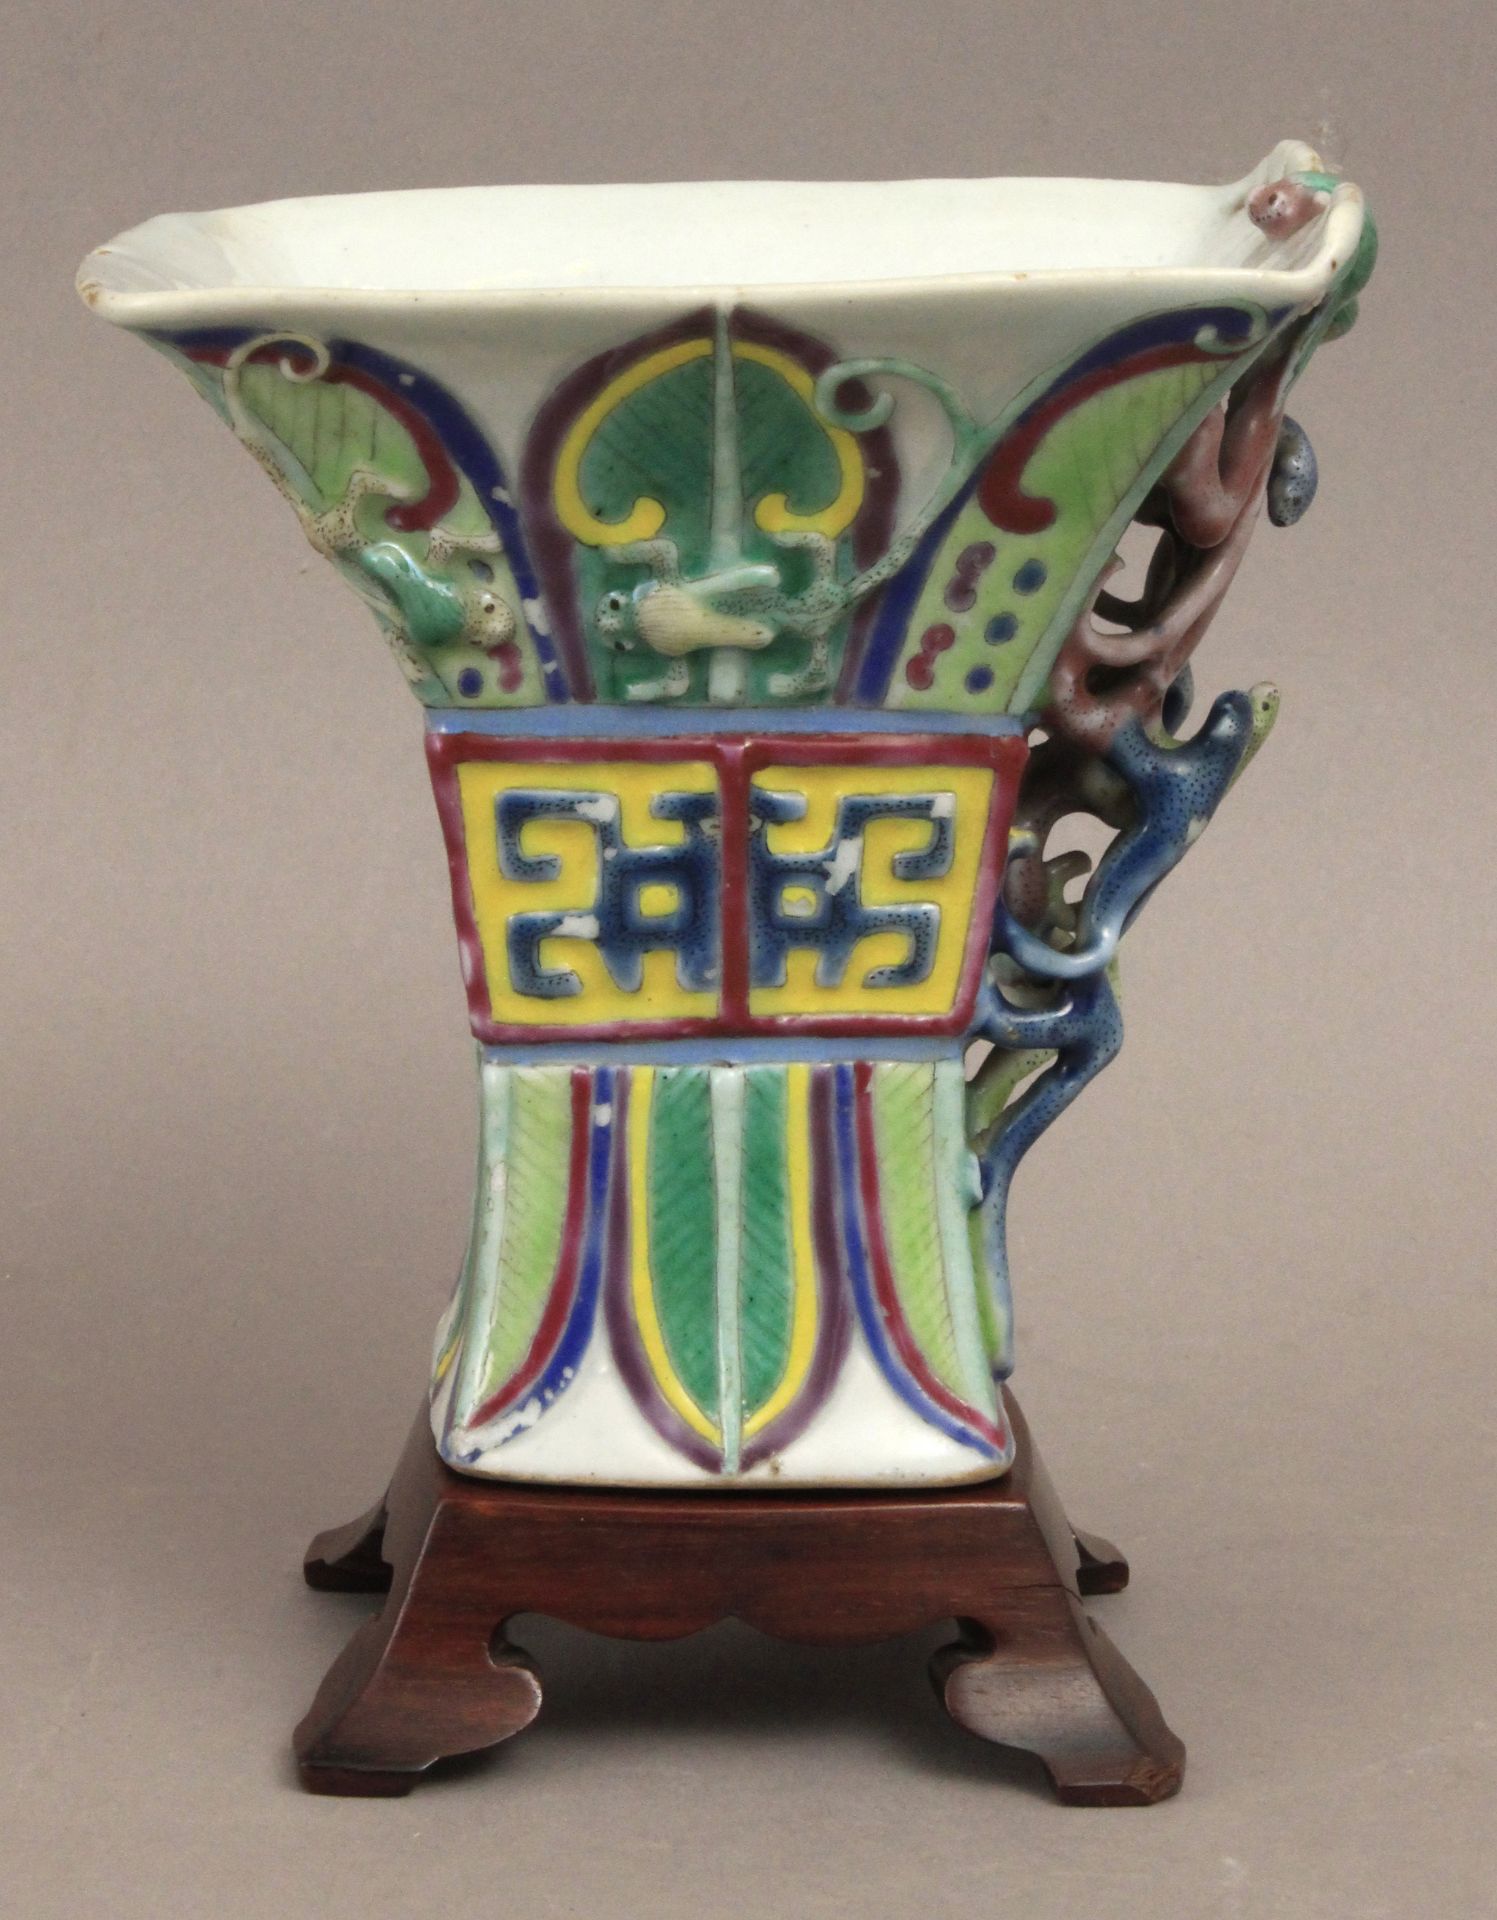 An 18th century Chinese libation cup from Qianlong period in polychromed porcelain